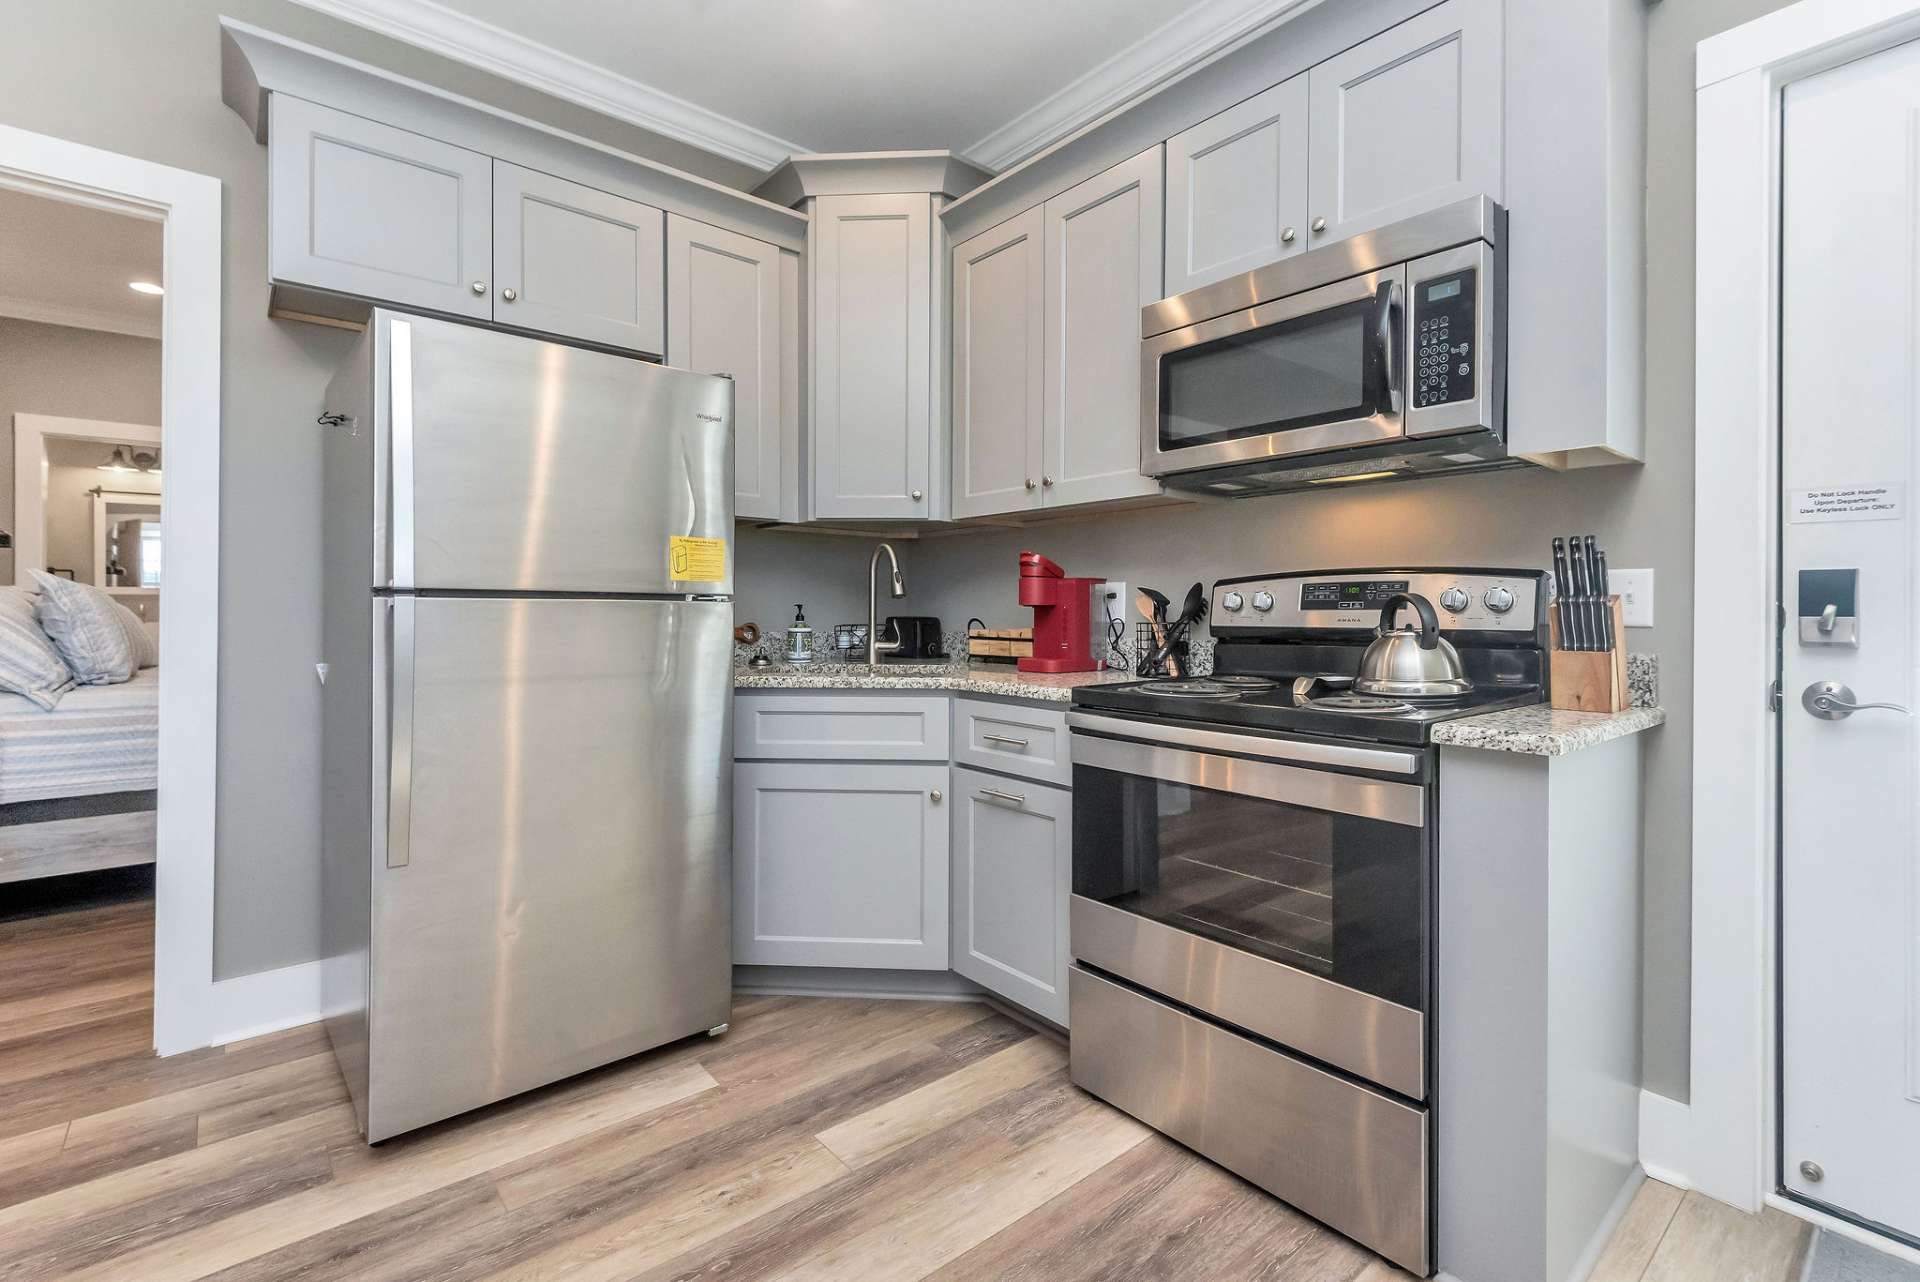 Each kitchen offers granite counter tops and stainless appliances.